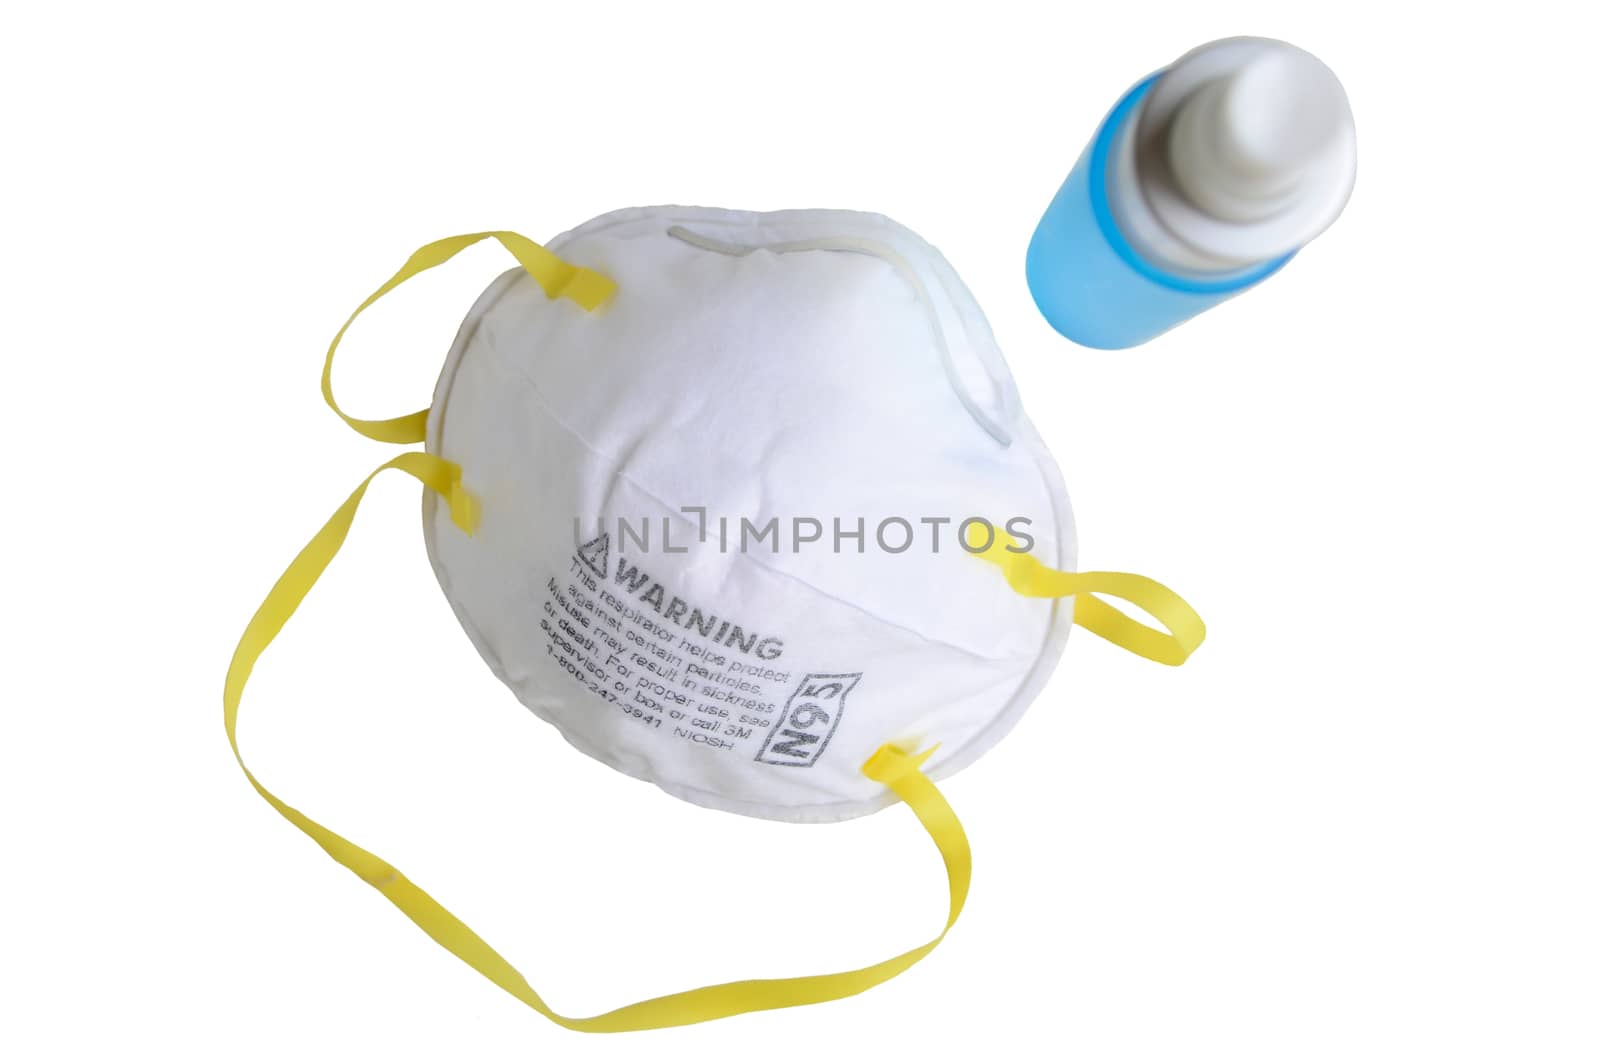 N95 respirator  with alcohol sanitizer gel isolated on white background for covid-19 Coronavirus prevention concept.